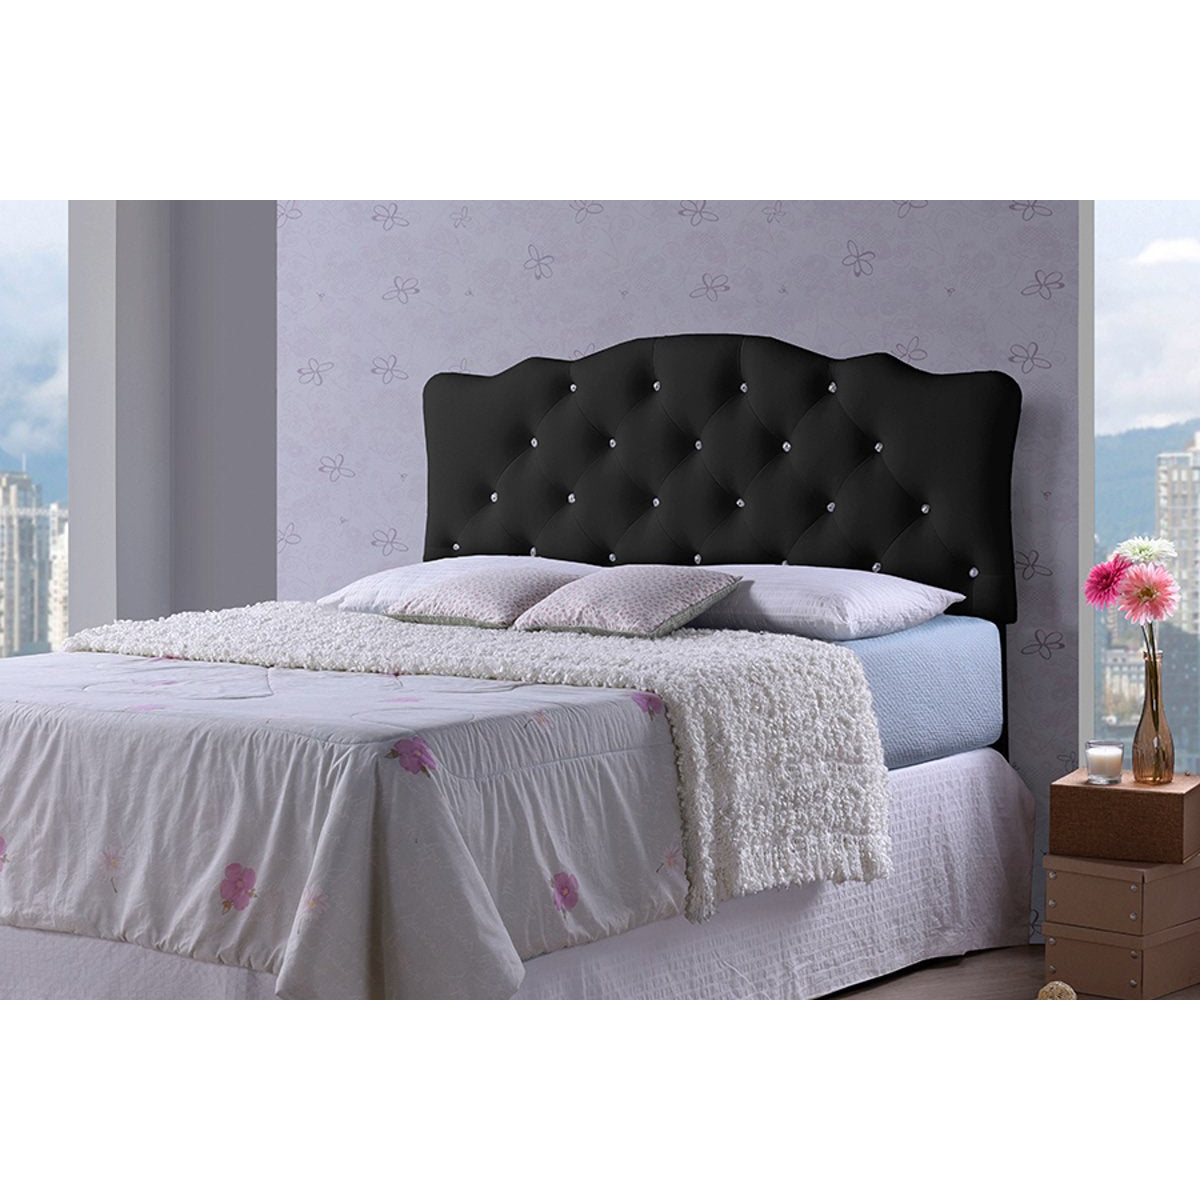 Baxton Studio Rita Modern and Contemporary Queen Size Black Faux Leather Upholstered Button-tufted Scalloped Headboard Baxton Studio-Headboards-Minimal And Modern - 2